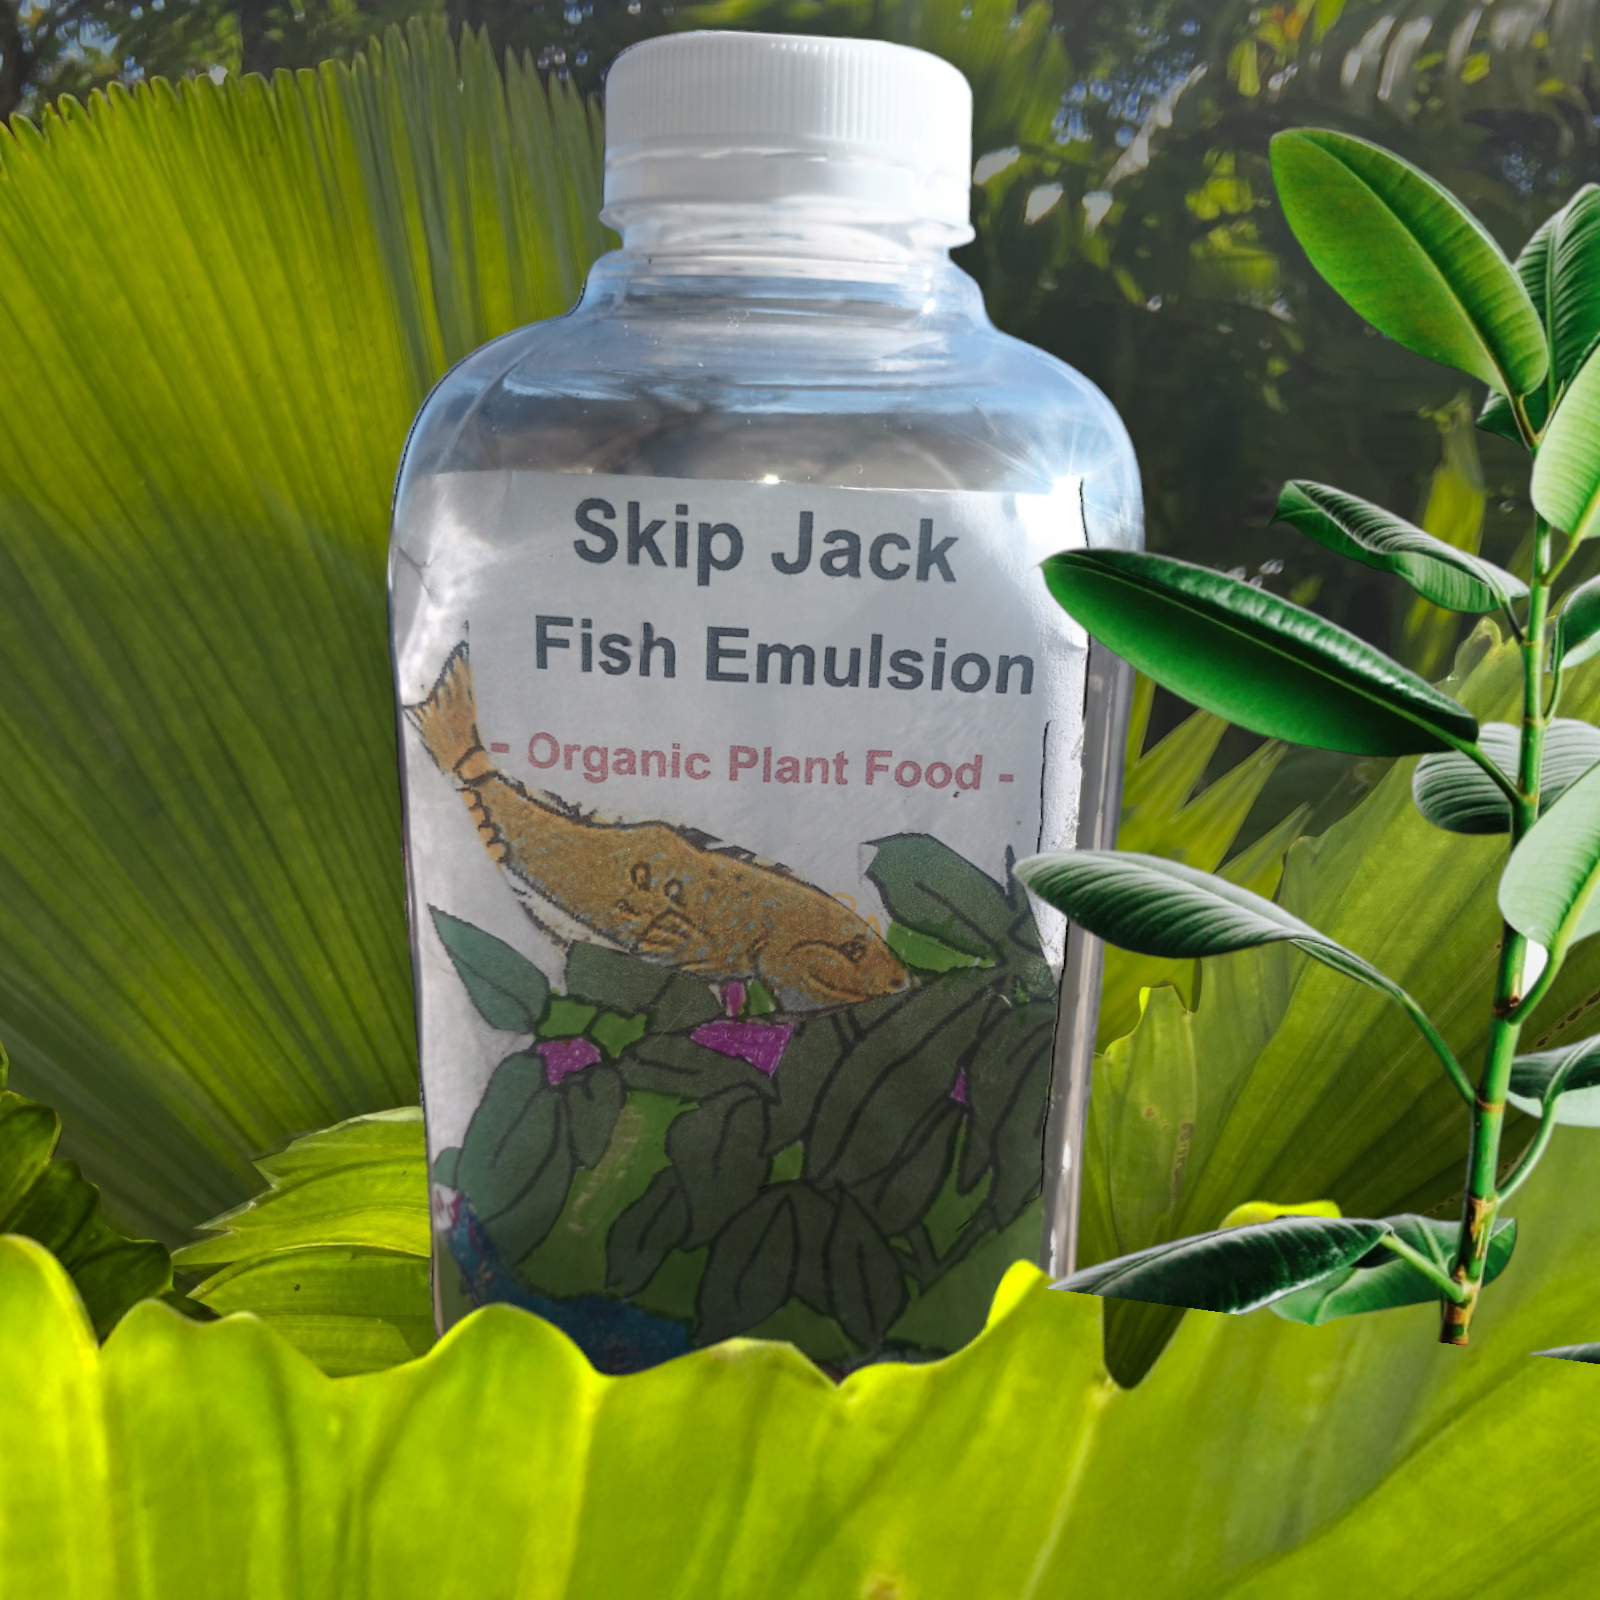 Skip Fish  Organic Fish Emulsion more than just a plat food. Actly they don't provide any food. They break down the compost with over million bactera and fungi. Plant don't use forks and spoons so how do they eat? breaks down the compost with million bacteria and fungi. Plants can not eat unless the compost is broken down. Use Skip Jack and your garden will reward you with many great harvests all season.